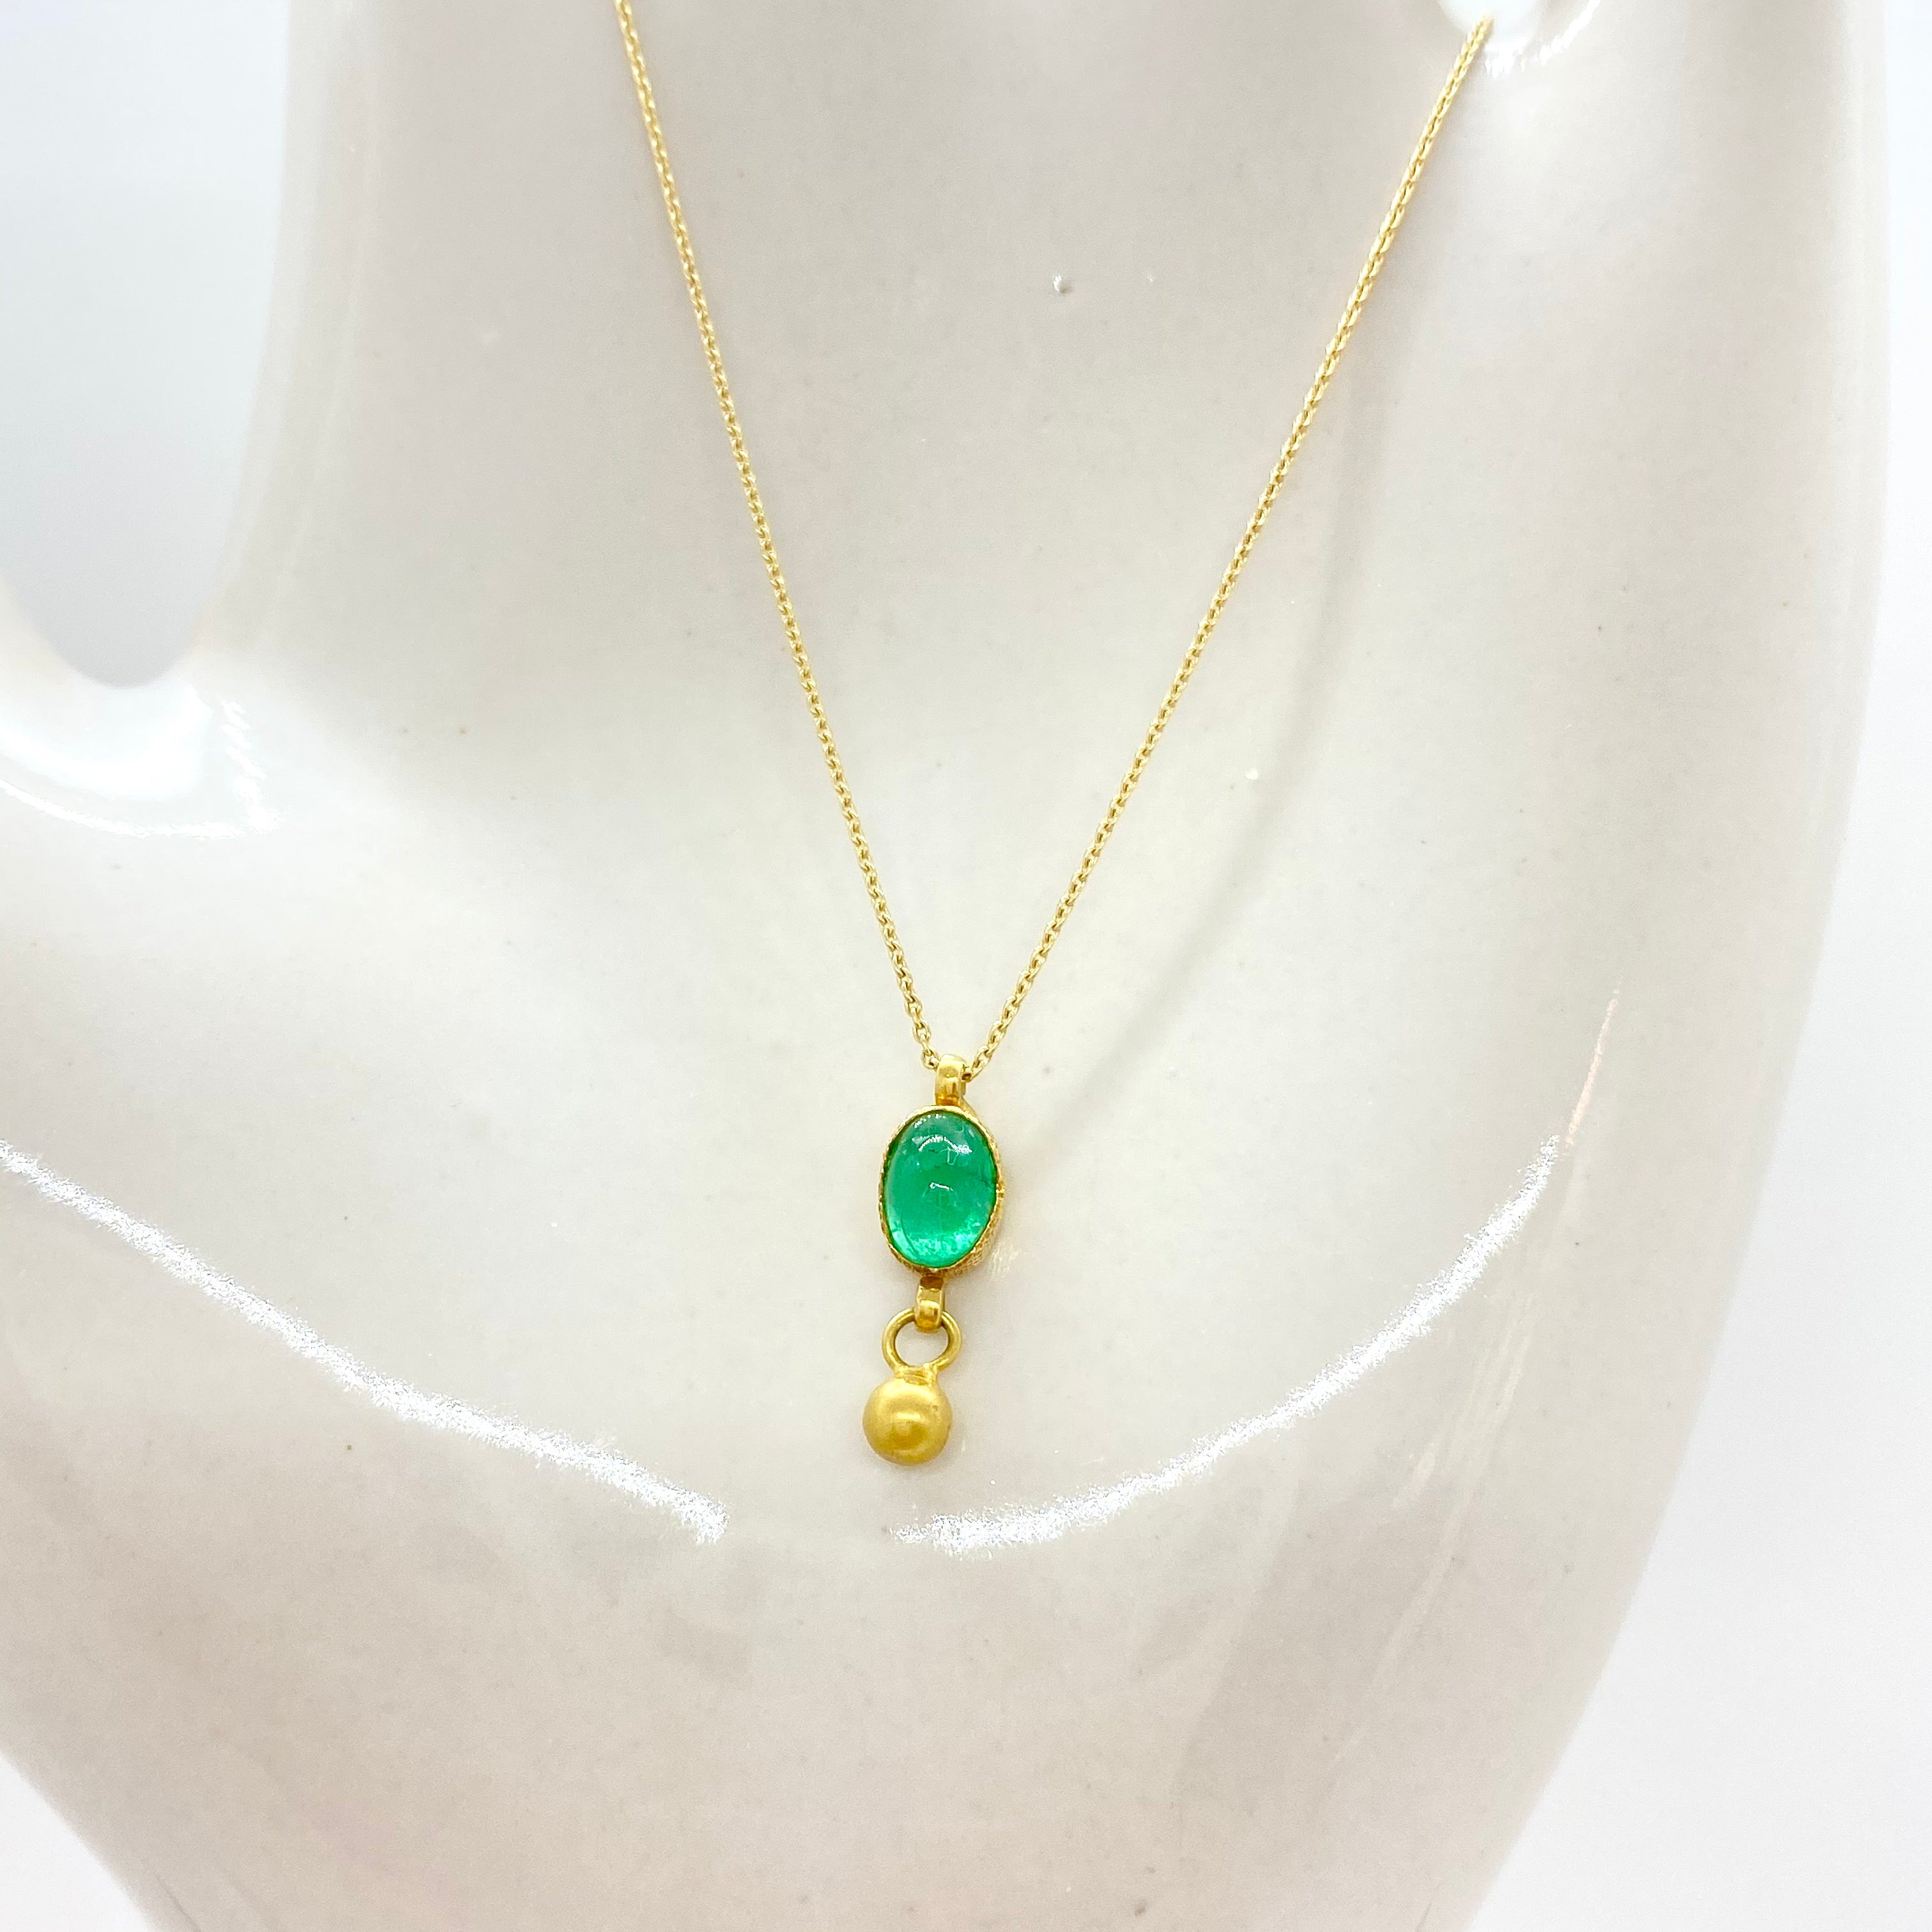 14k Gold Chain Necklace w/ 18k Gold Emerald Pendant & 18k Gold Nugget